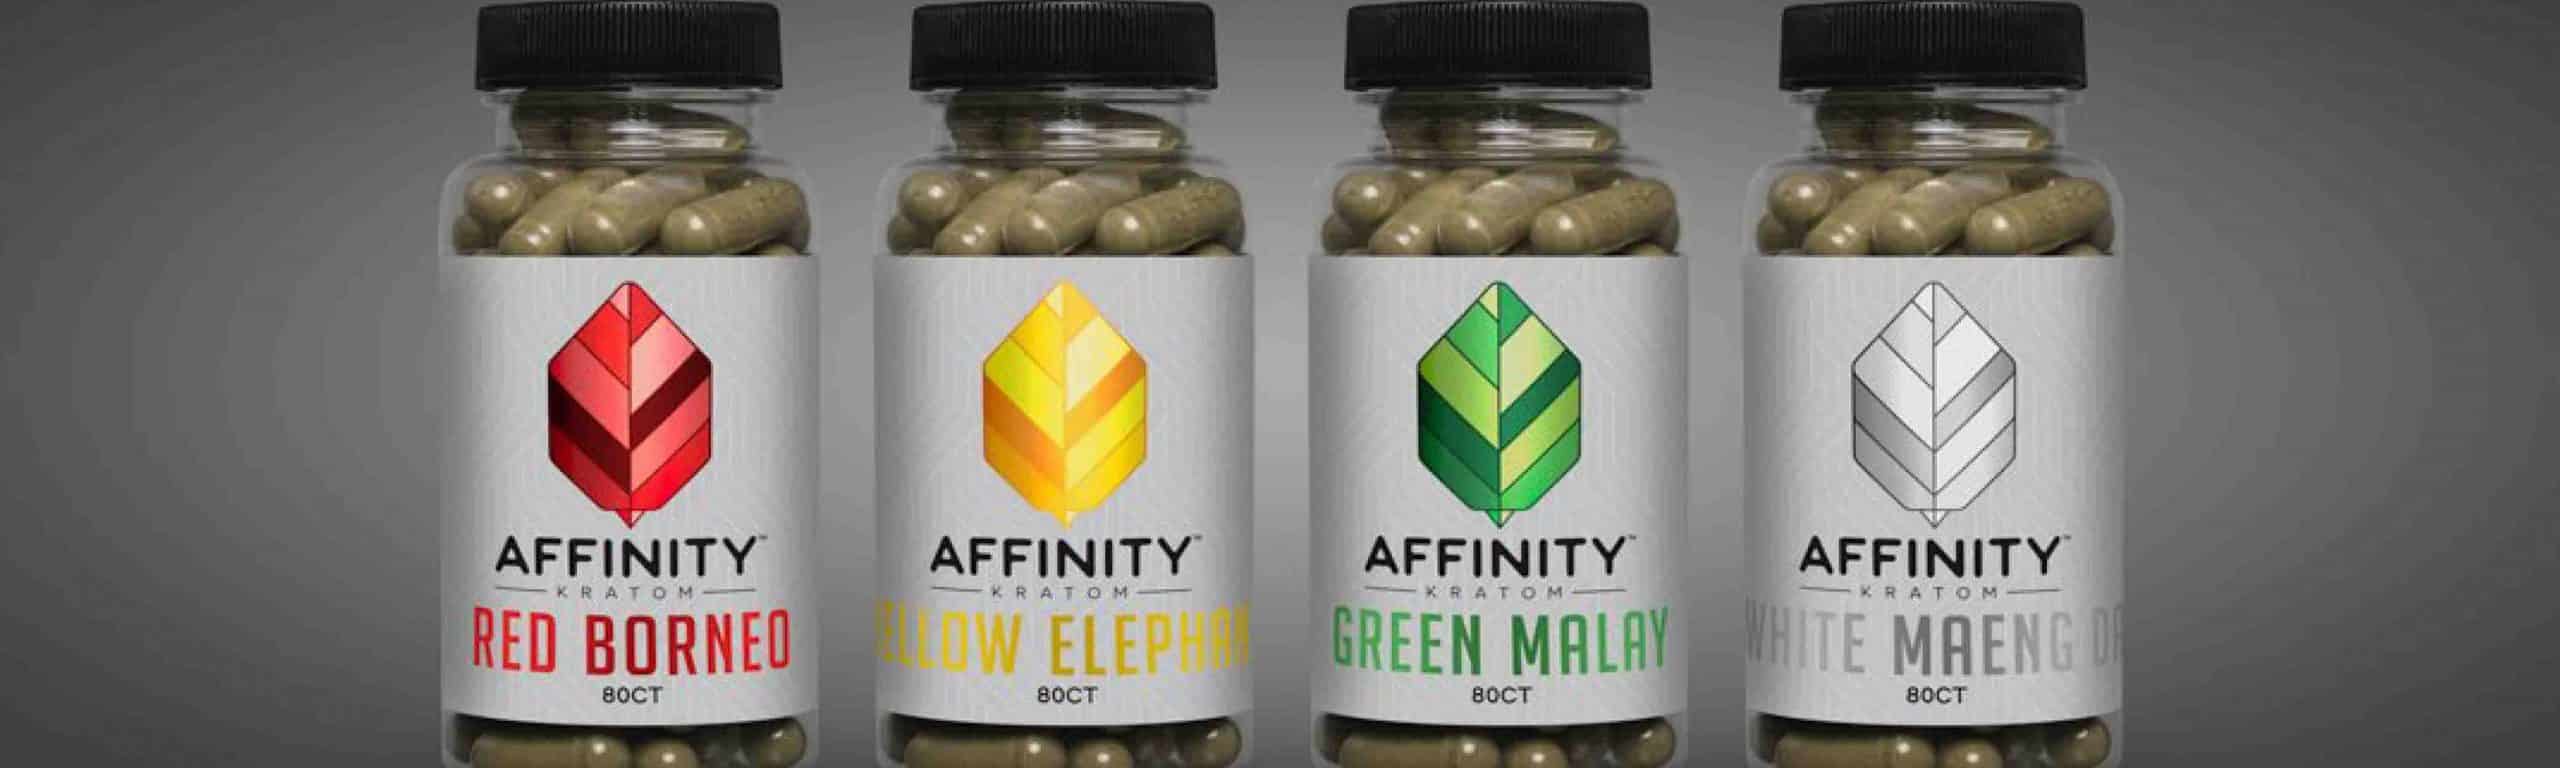 image of affinity kratom products